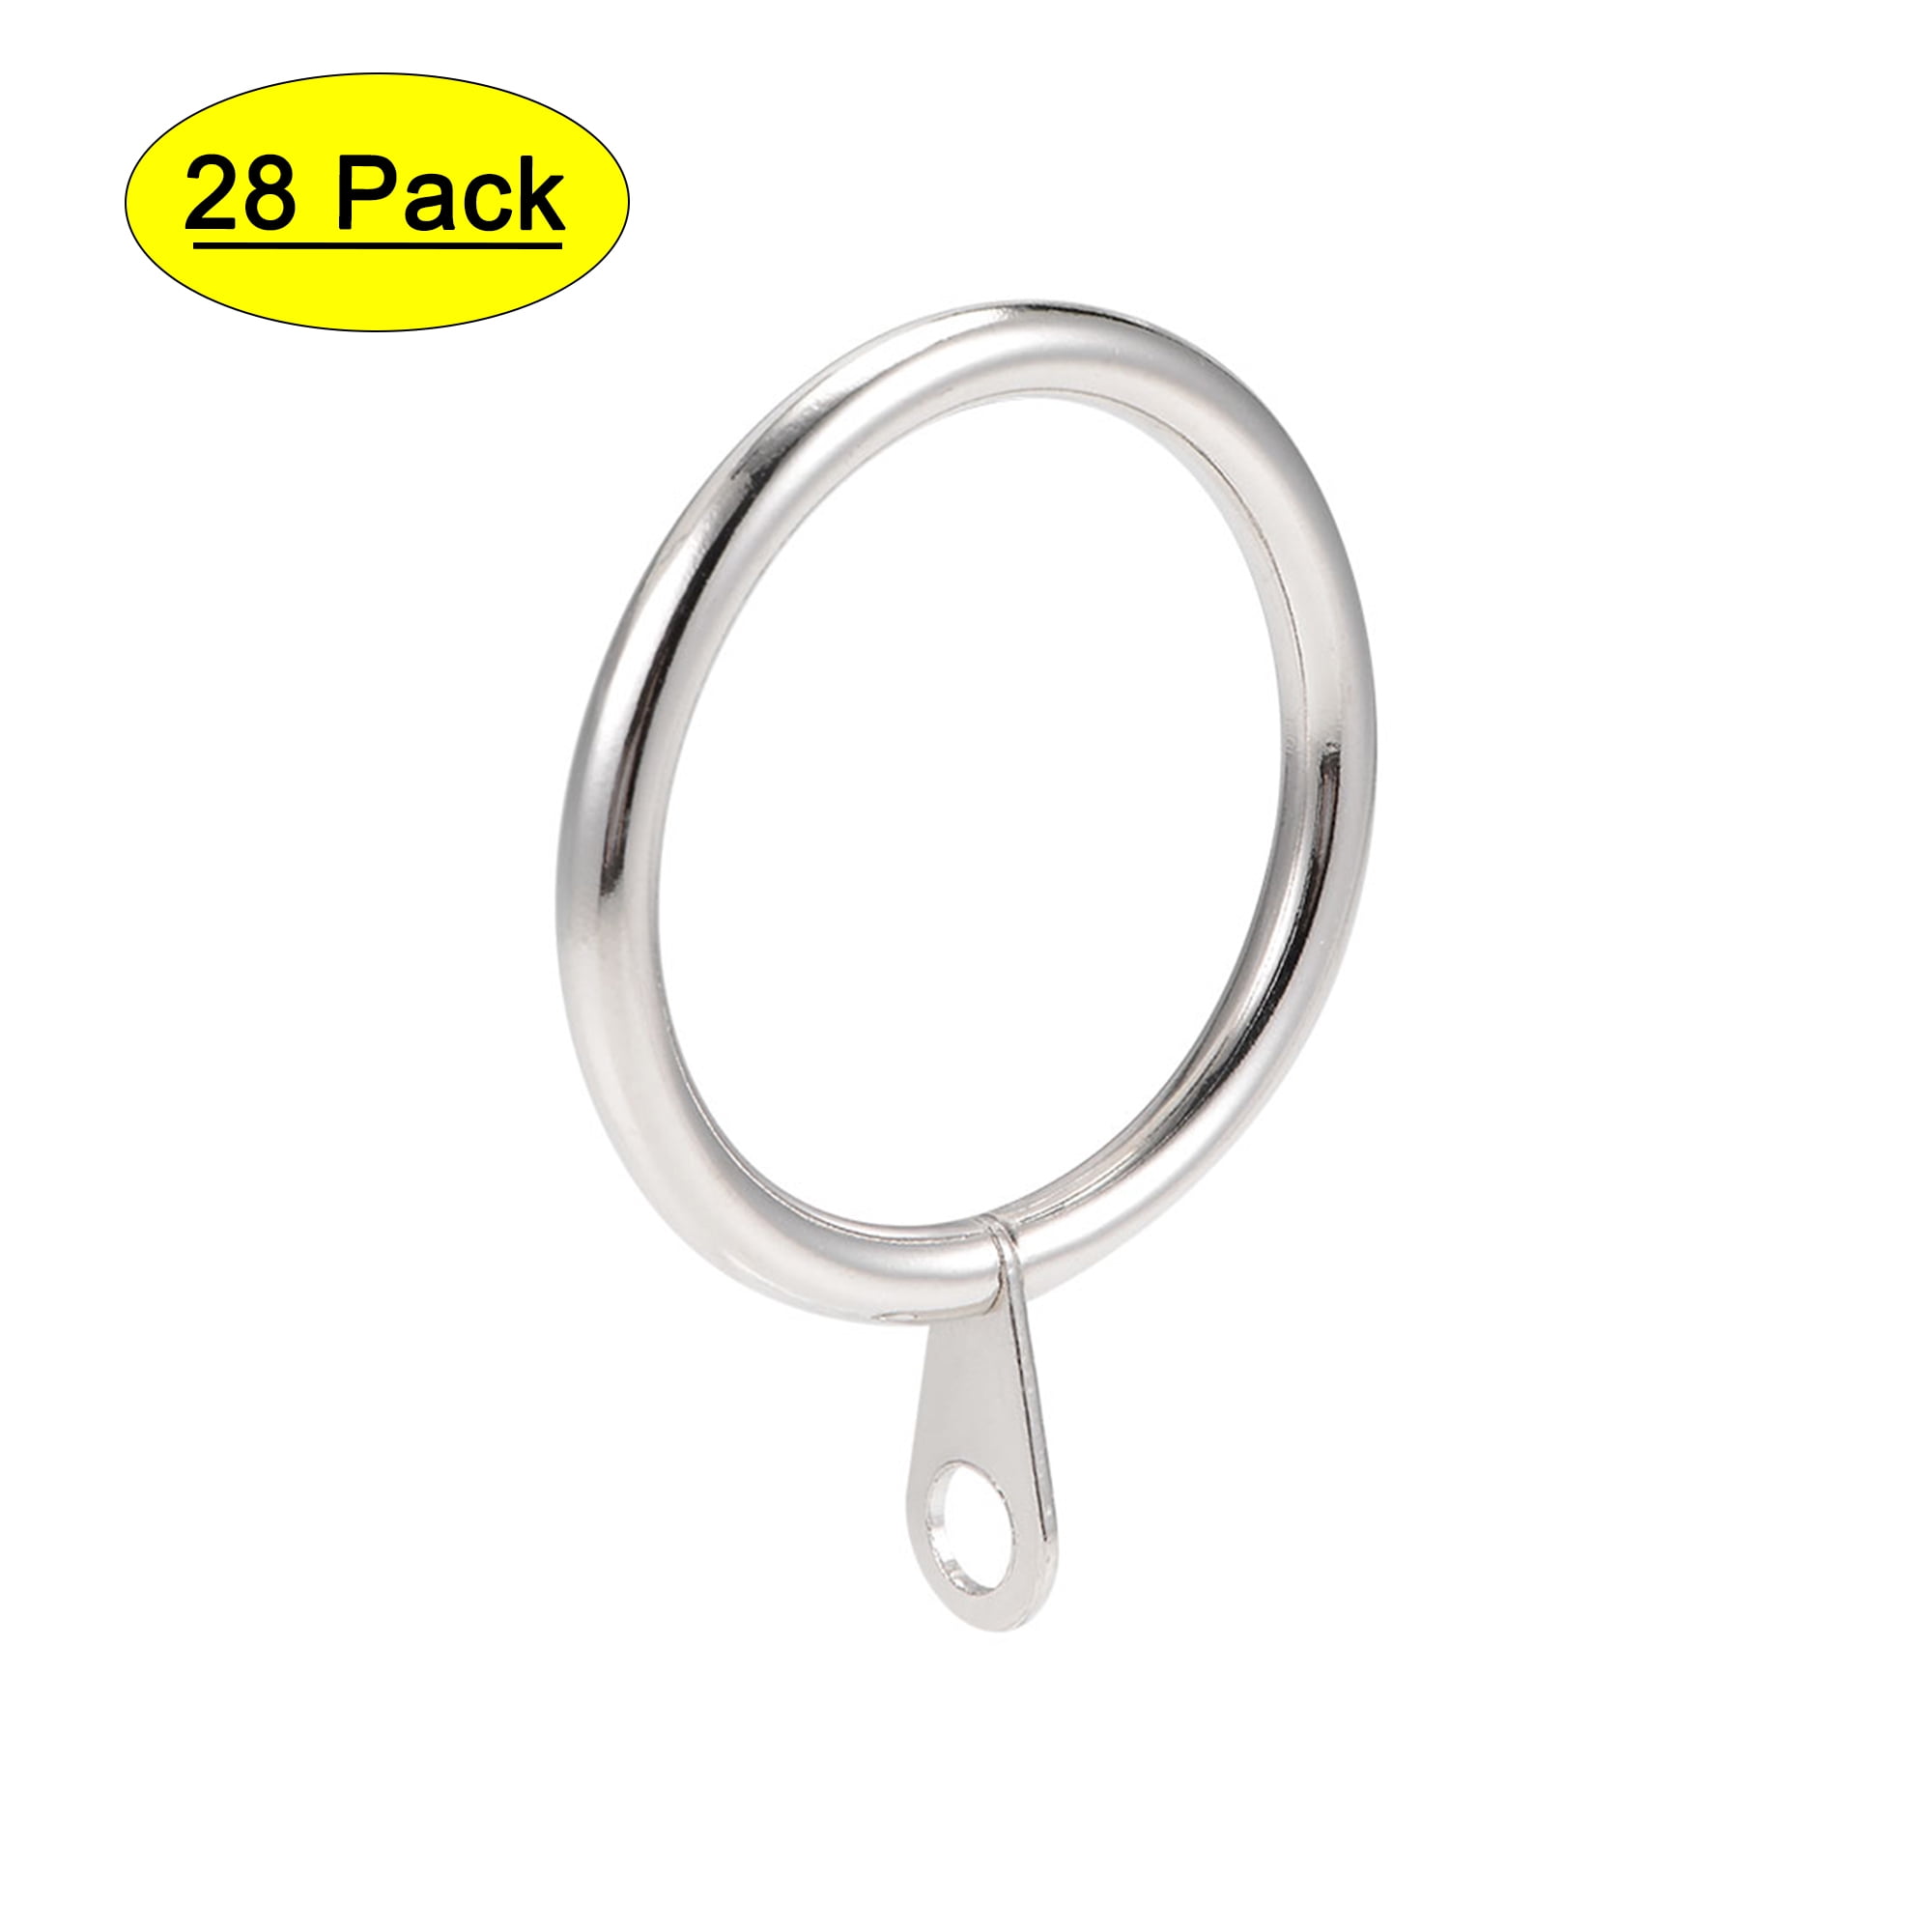 6 Large Chrome effect 25-28mm curtain pole rings pk 